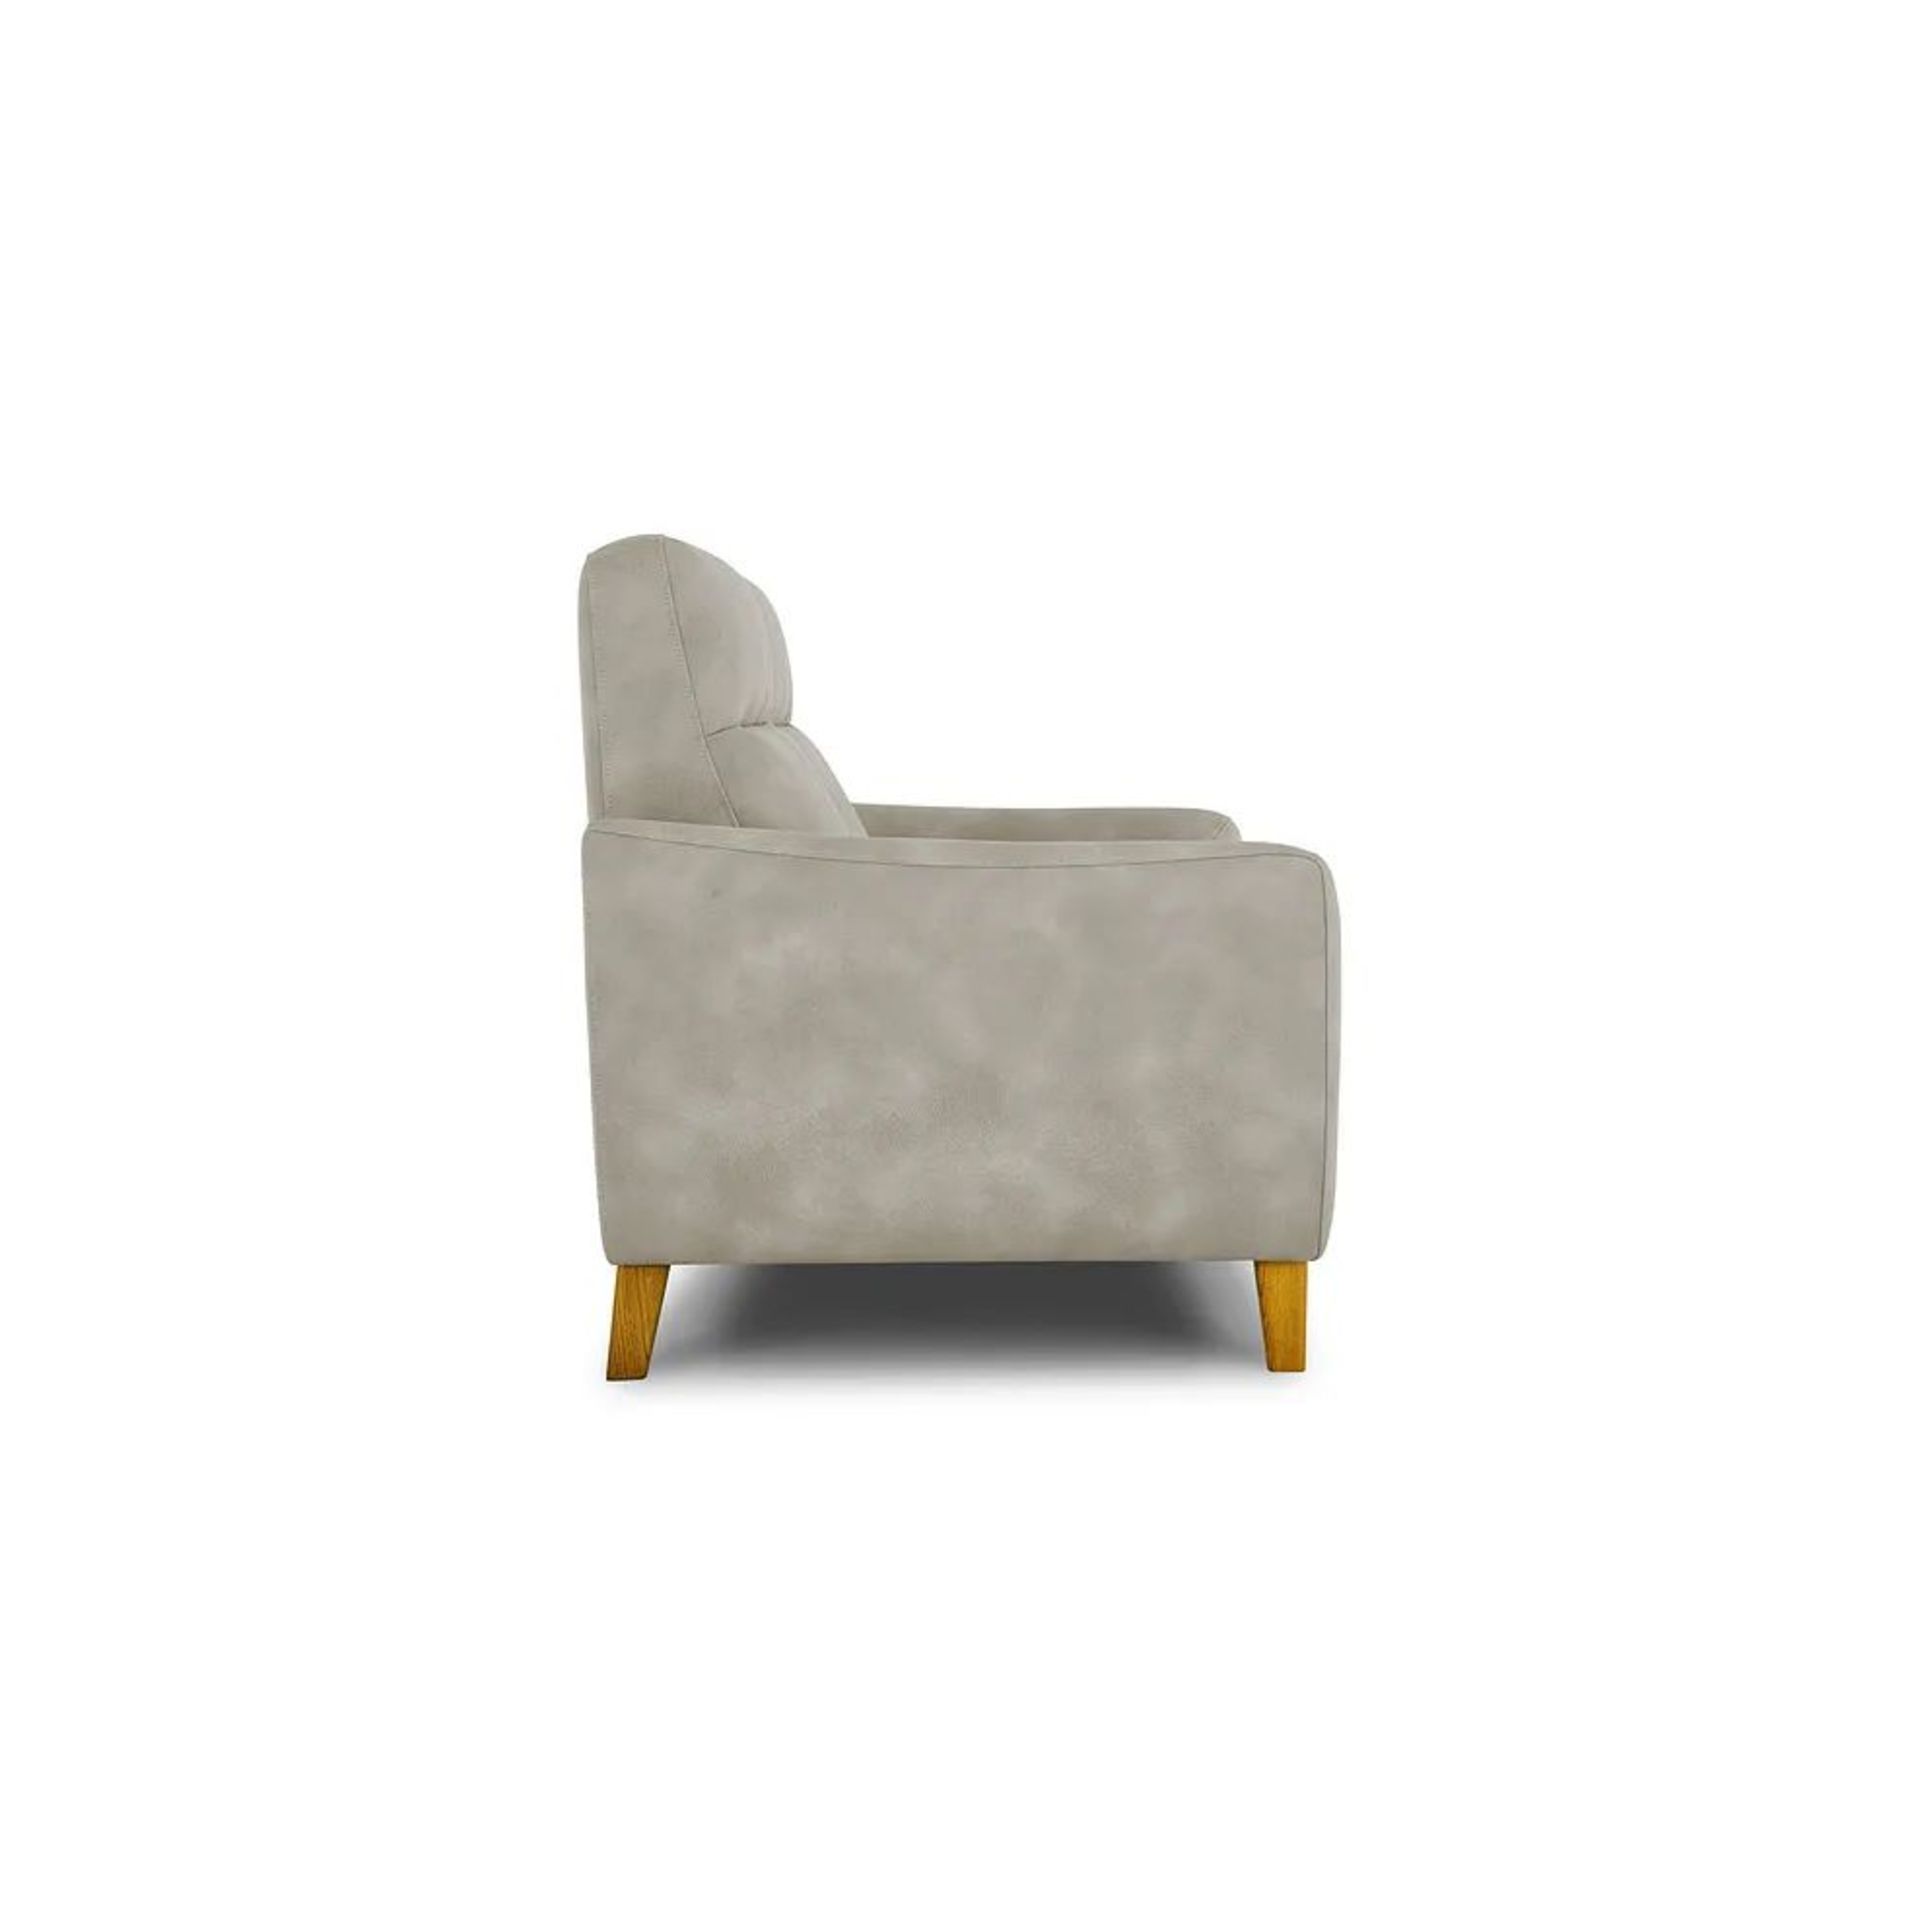 BRAND NEW DYLAN Static Armchair - OXFORD BEIGE FABRIC. RRP £749. Our Dylan armchair, shown here in - Bild 4 aus 8